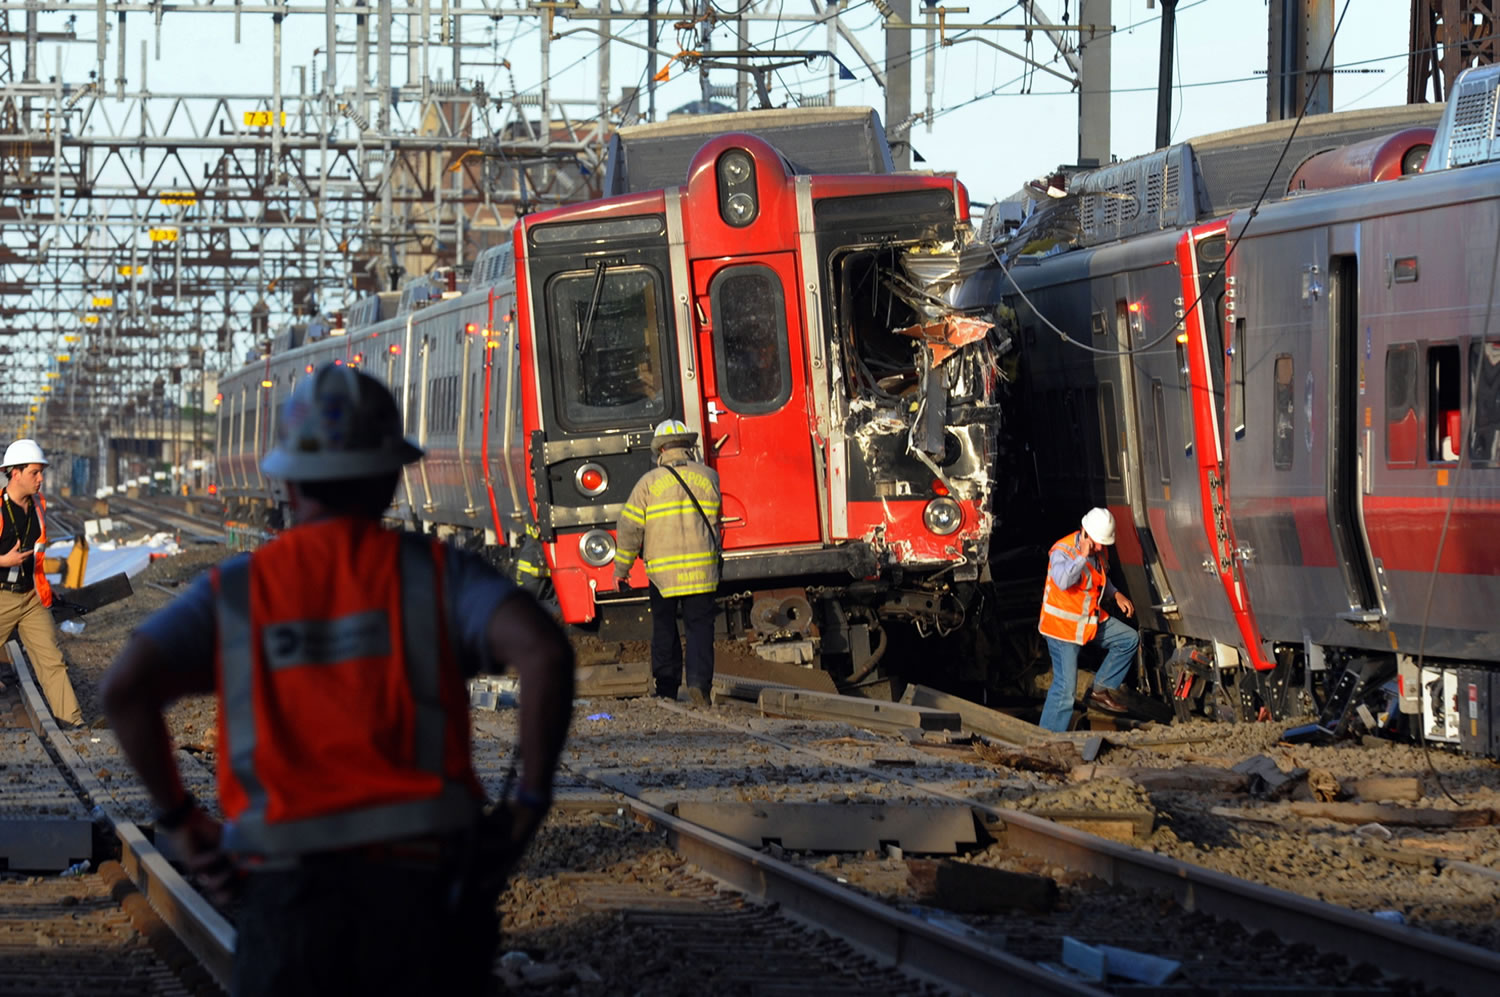 Emergency personnel work at the scene where two Metro North commuter trains collided Friday near Fairfield, Conn. Bill Kaempffer, a spokesman for Bridgeport public safety, told The Associated Press approximately 49 people were injured, including four with serious injuries.